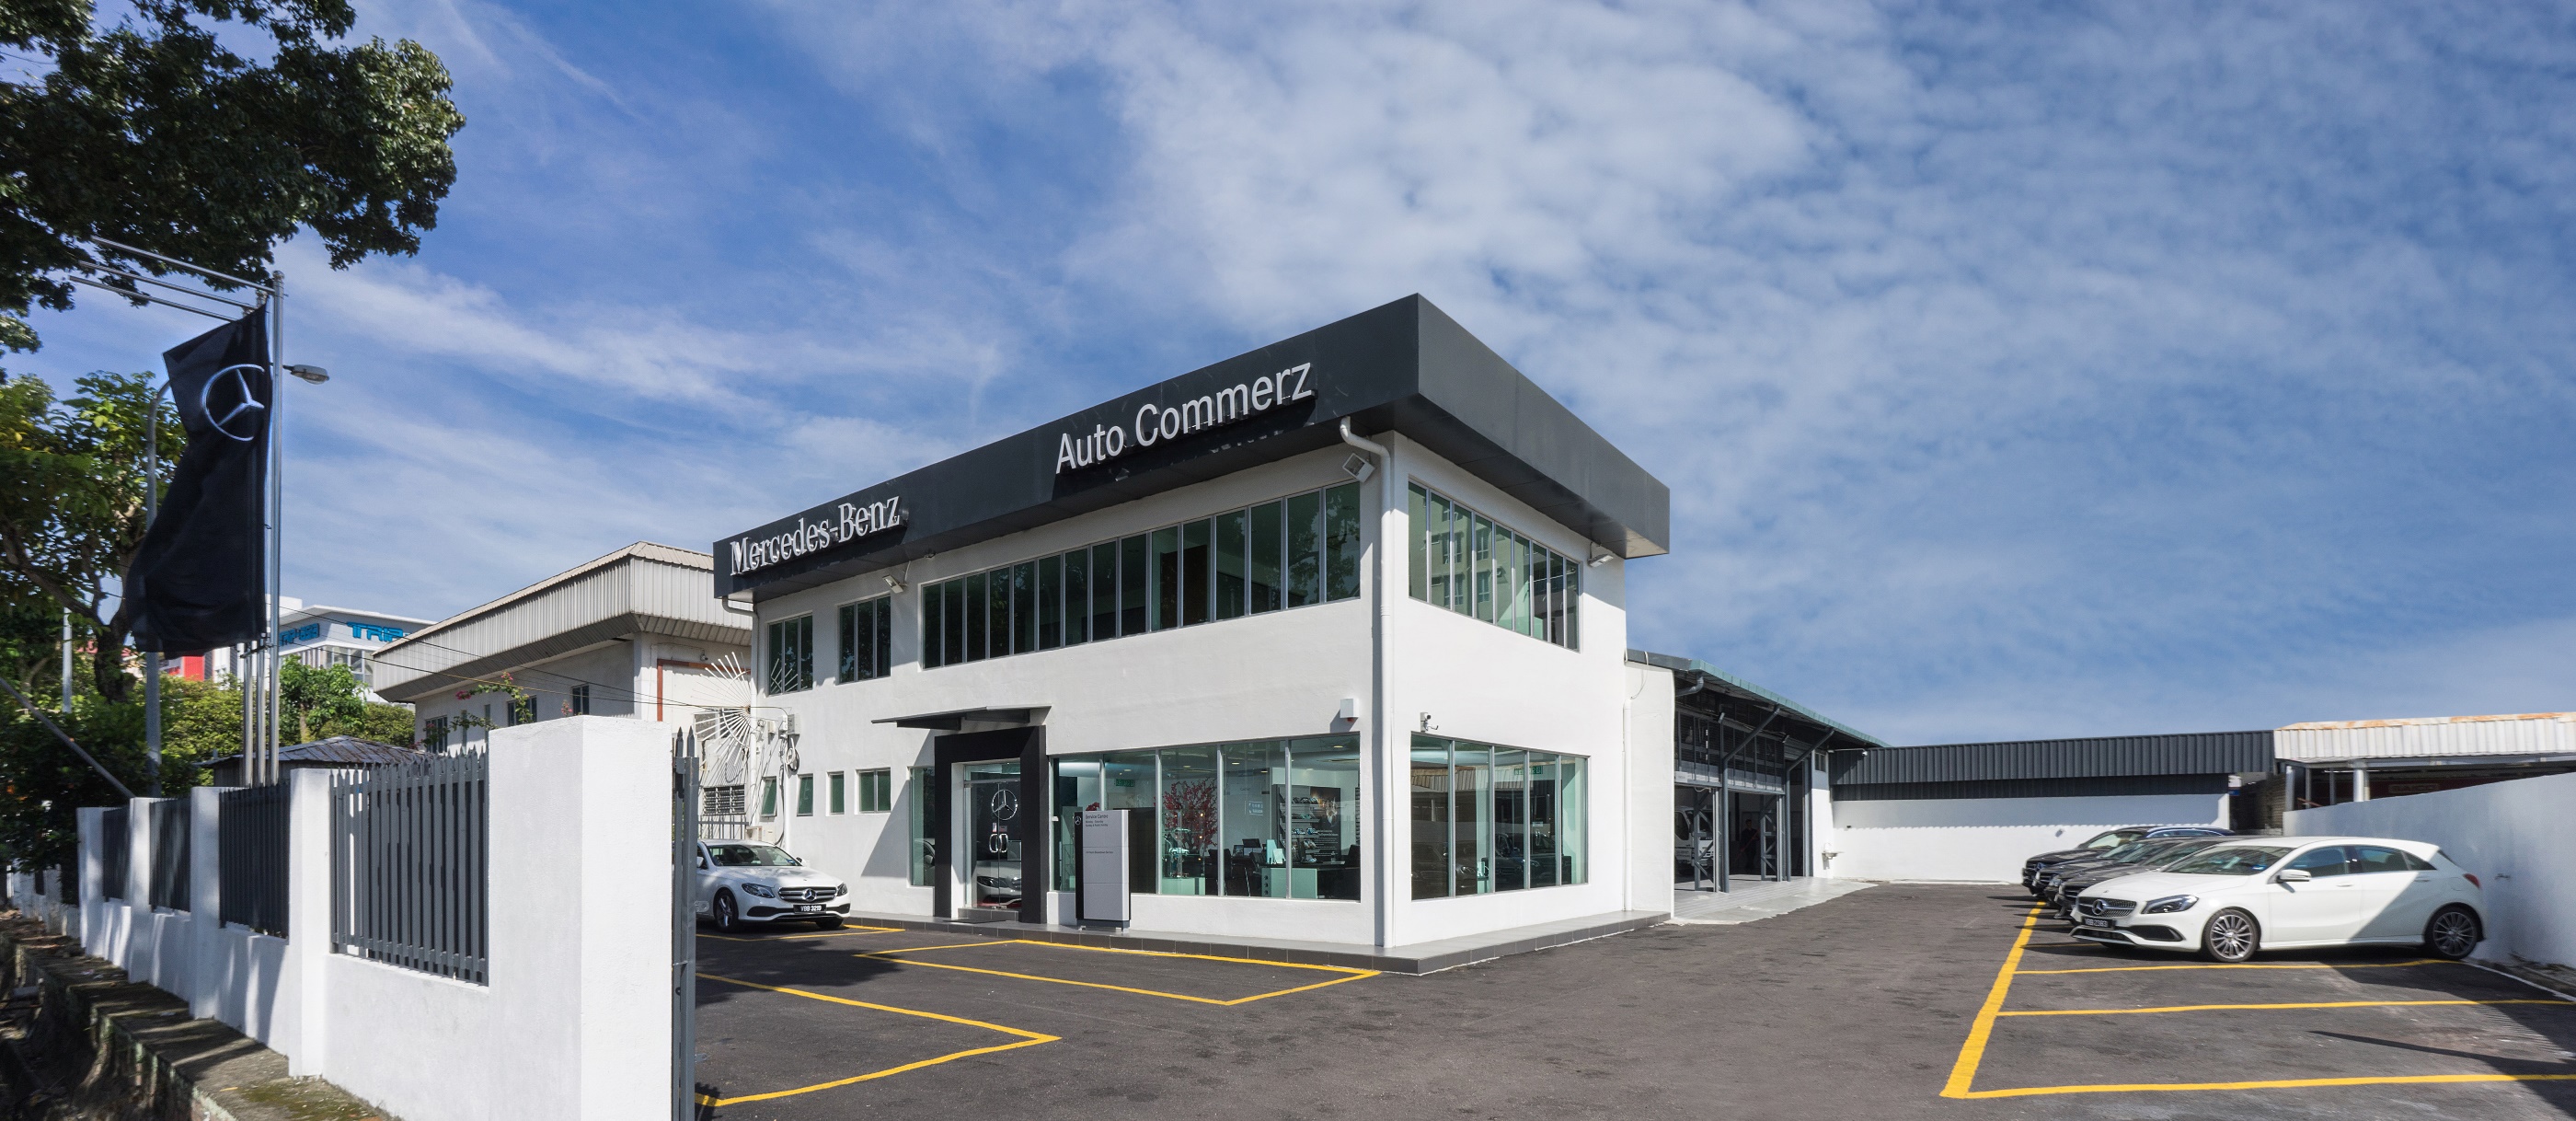 Mercedes-Benz Auto Commerz 2S Service Centre Opens In Setapak - News and reviews on Malaysian cars, motorcycles and automotive lifestyle